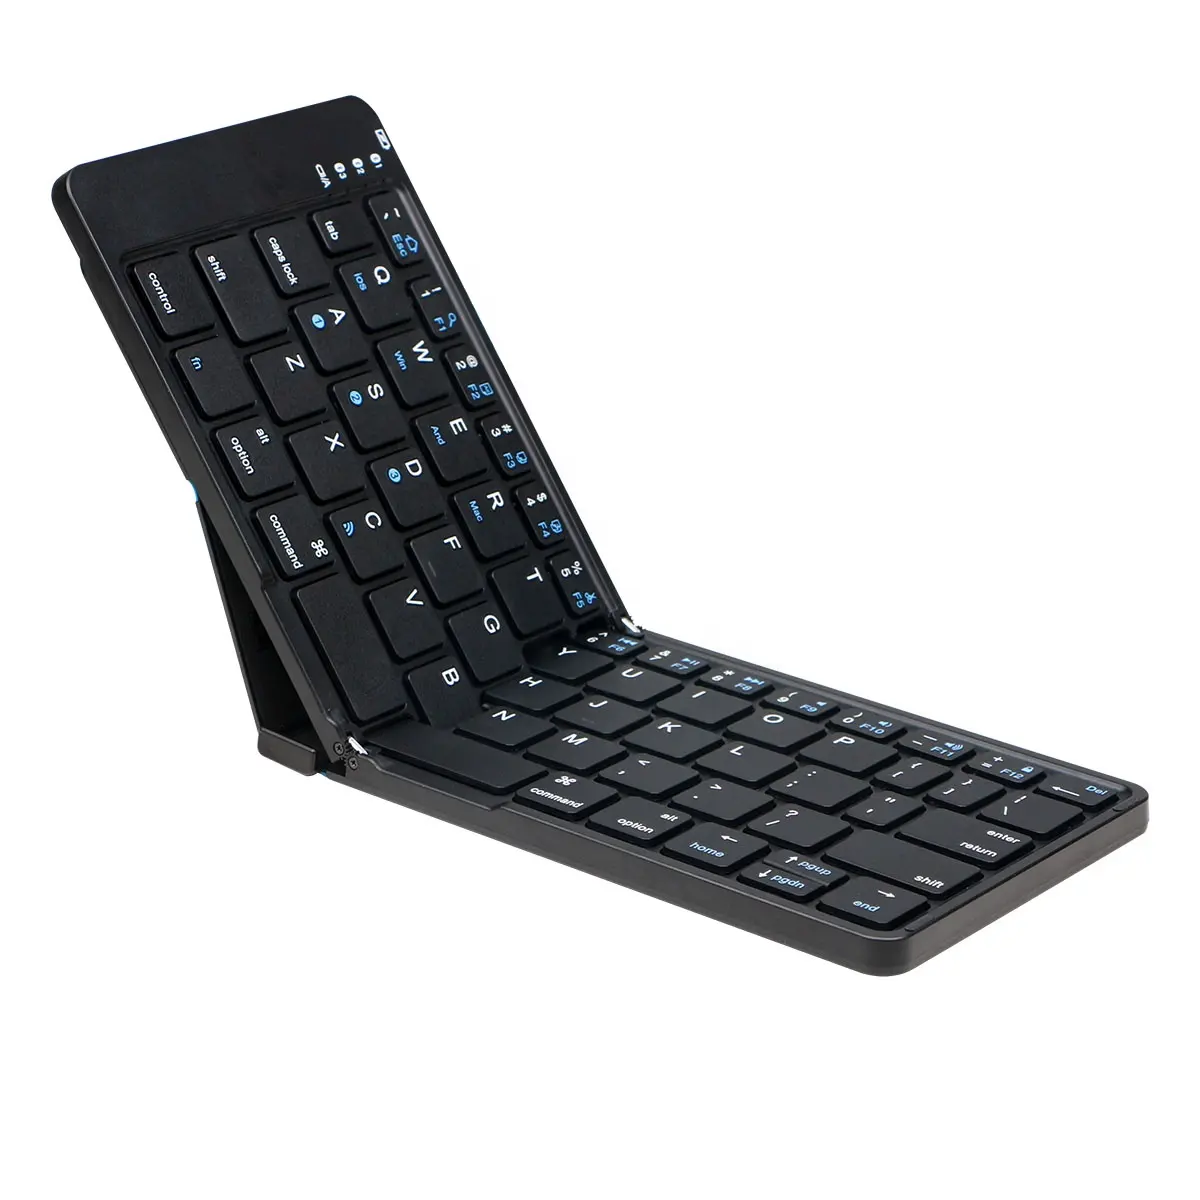 Portable and Foldable Keyboard with 3 BT Channel for IOS Android Windows Mac Smartphone Tablet Laptop and desktop